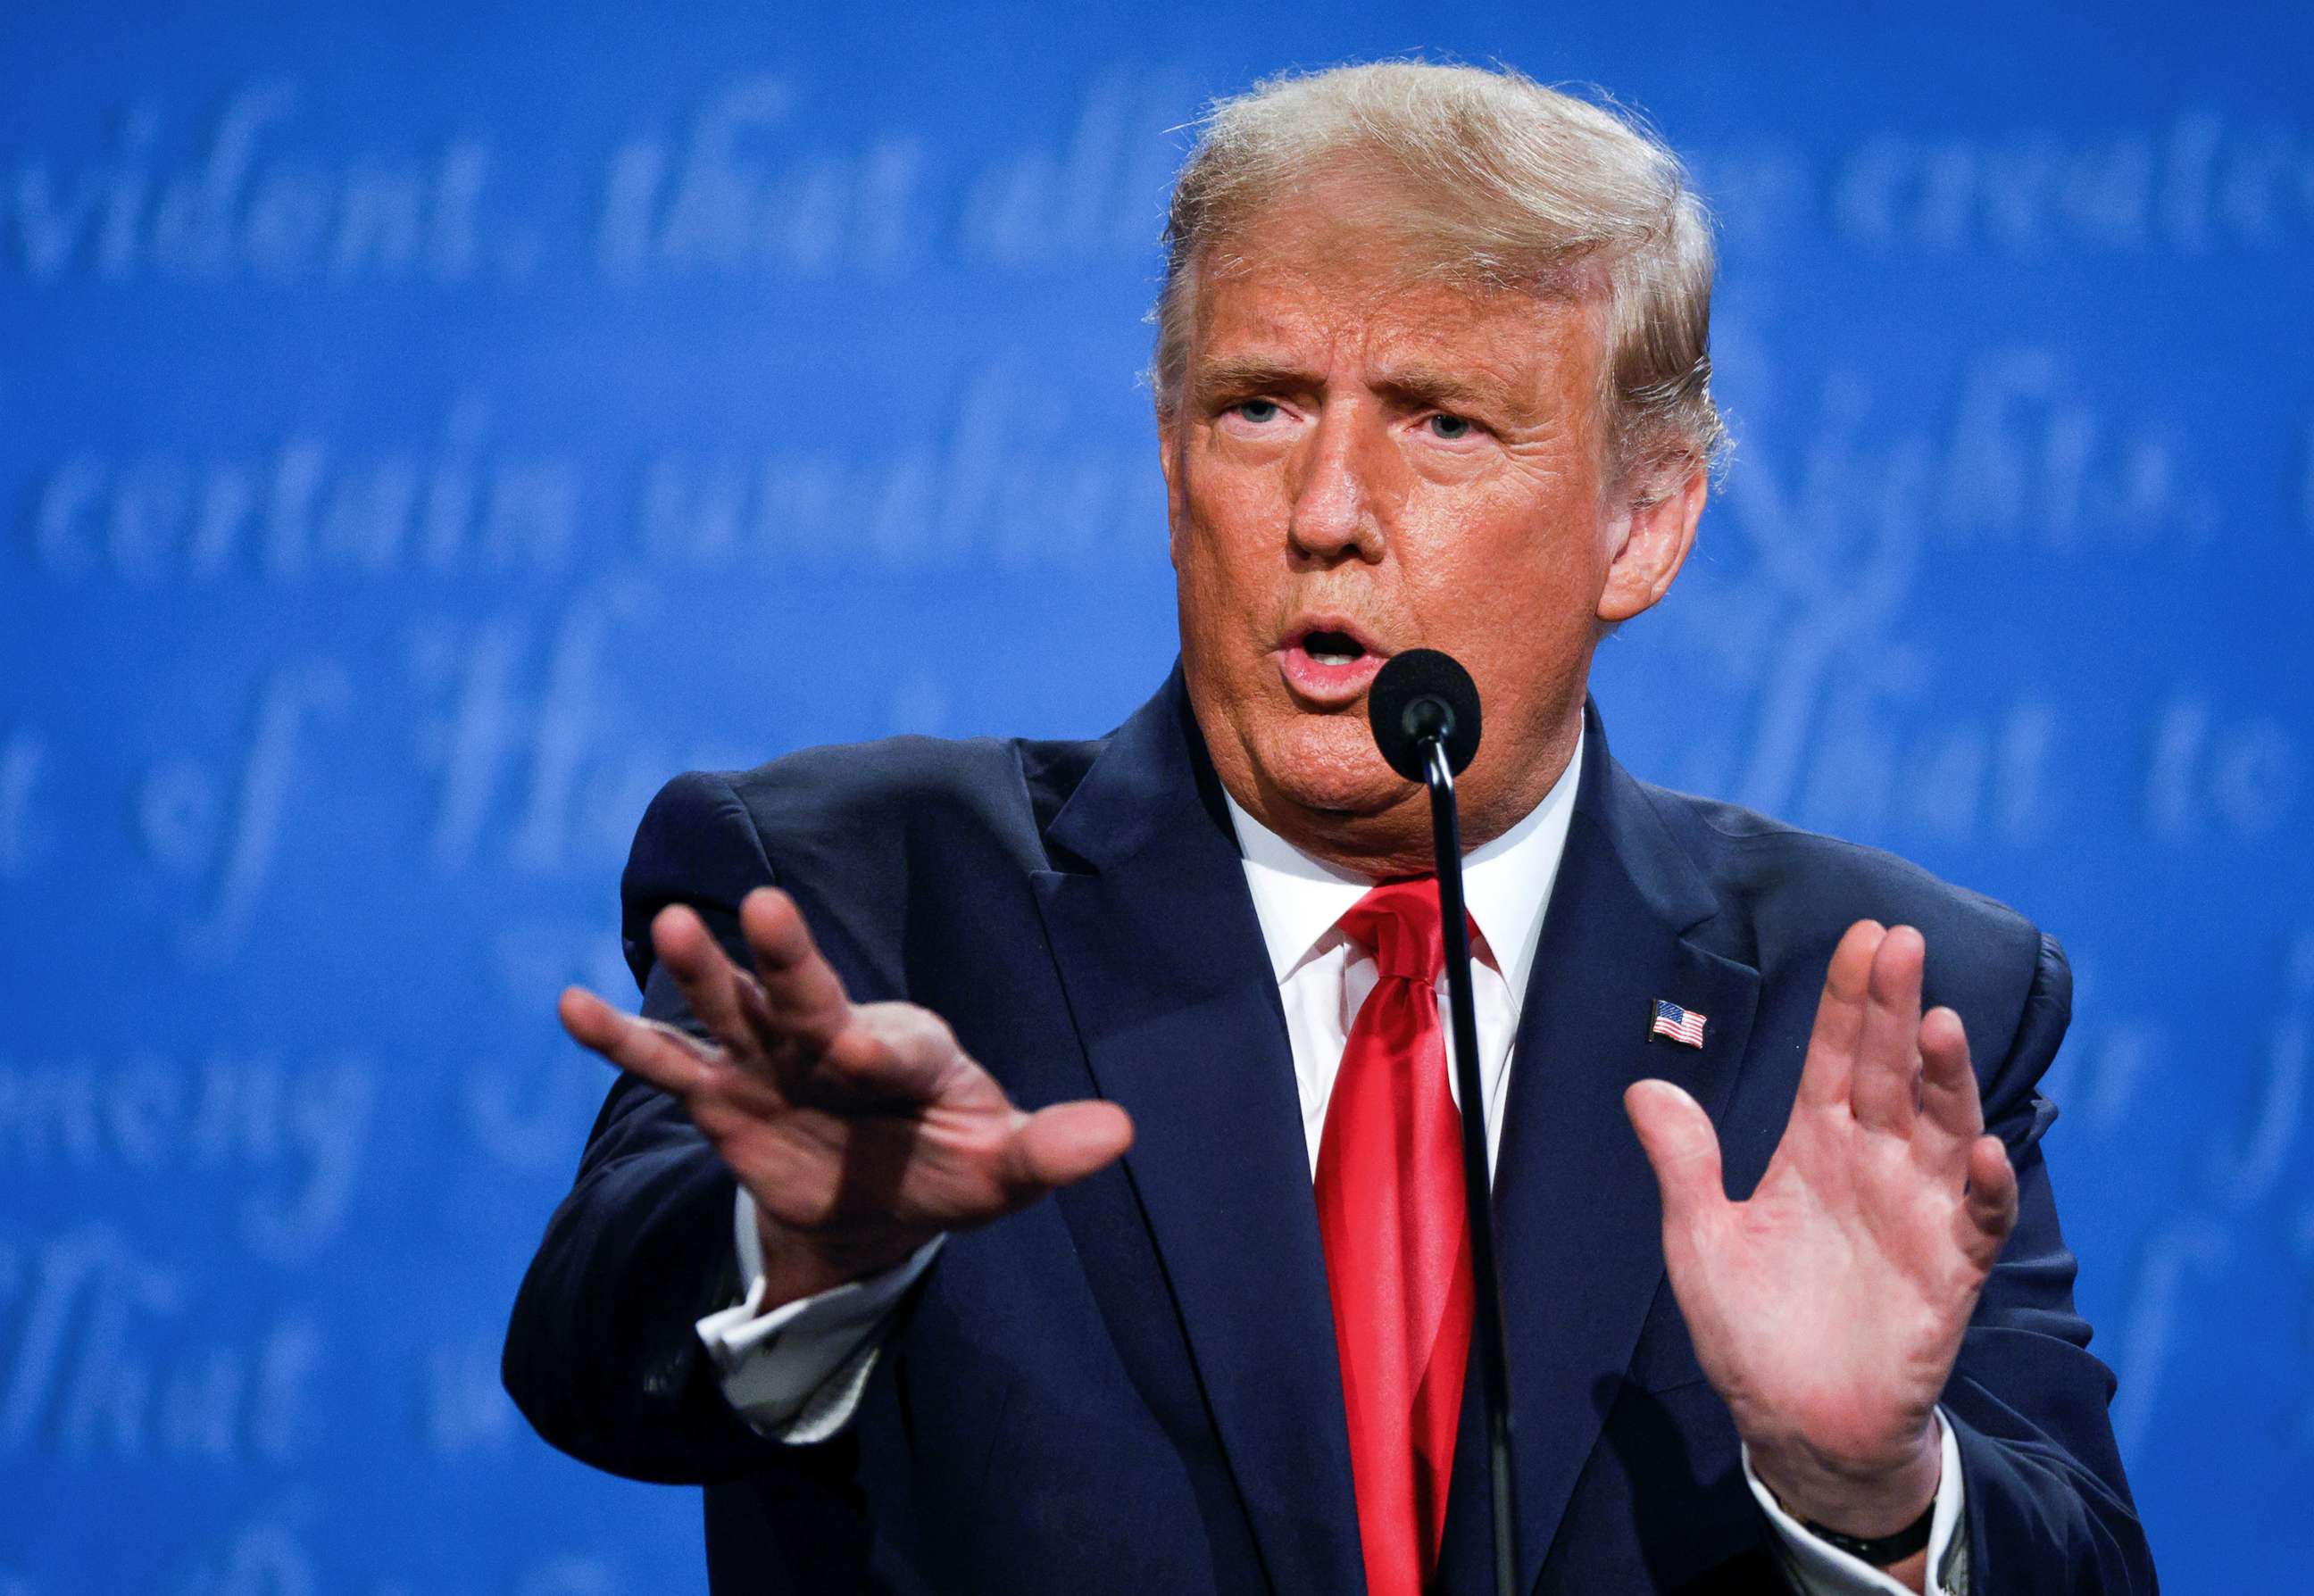 PHOTO: President Donald Trump gestures while he speaks during the final 2020 presidential campaign debate with Democratic presidential nominee Joe Biden at Belmont University in Nashville, Tenn., Oct. 22, 2020.